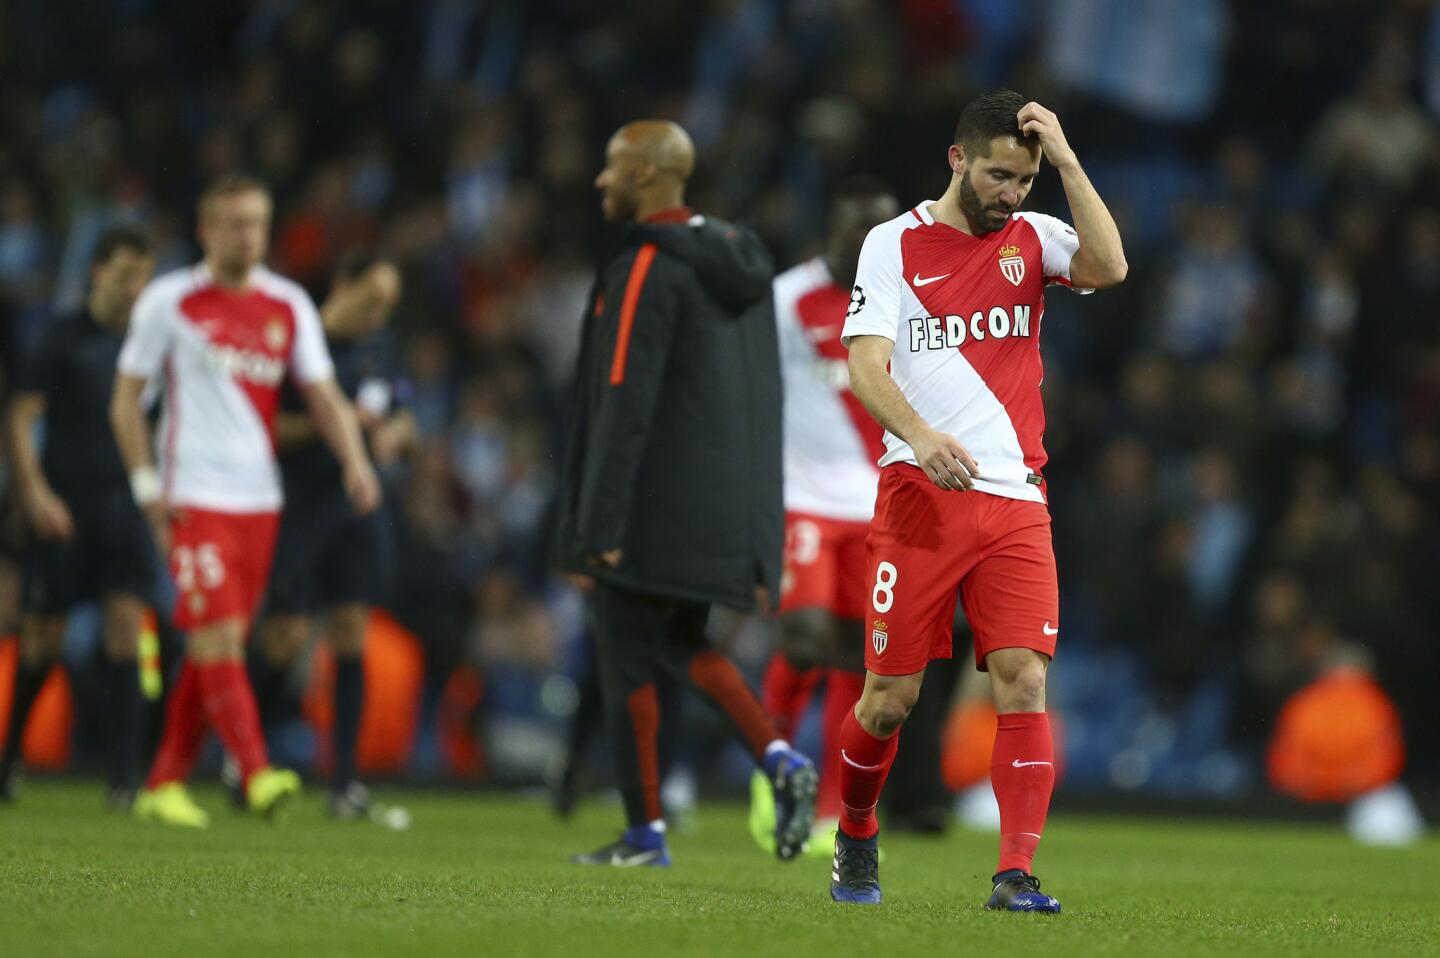 Monaco's Joao Moutinho reacts after the Champions League round of 16 first leg soccer match between Manchester City and Monaco at the Etihad Stadium in Manchester, England, Tuesday Feb. 21, 2017. Manchester City won the match 5-3. (AP Photo/Dave Thompson)